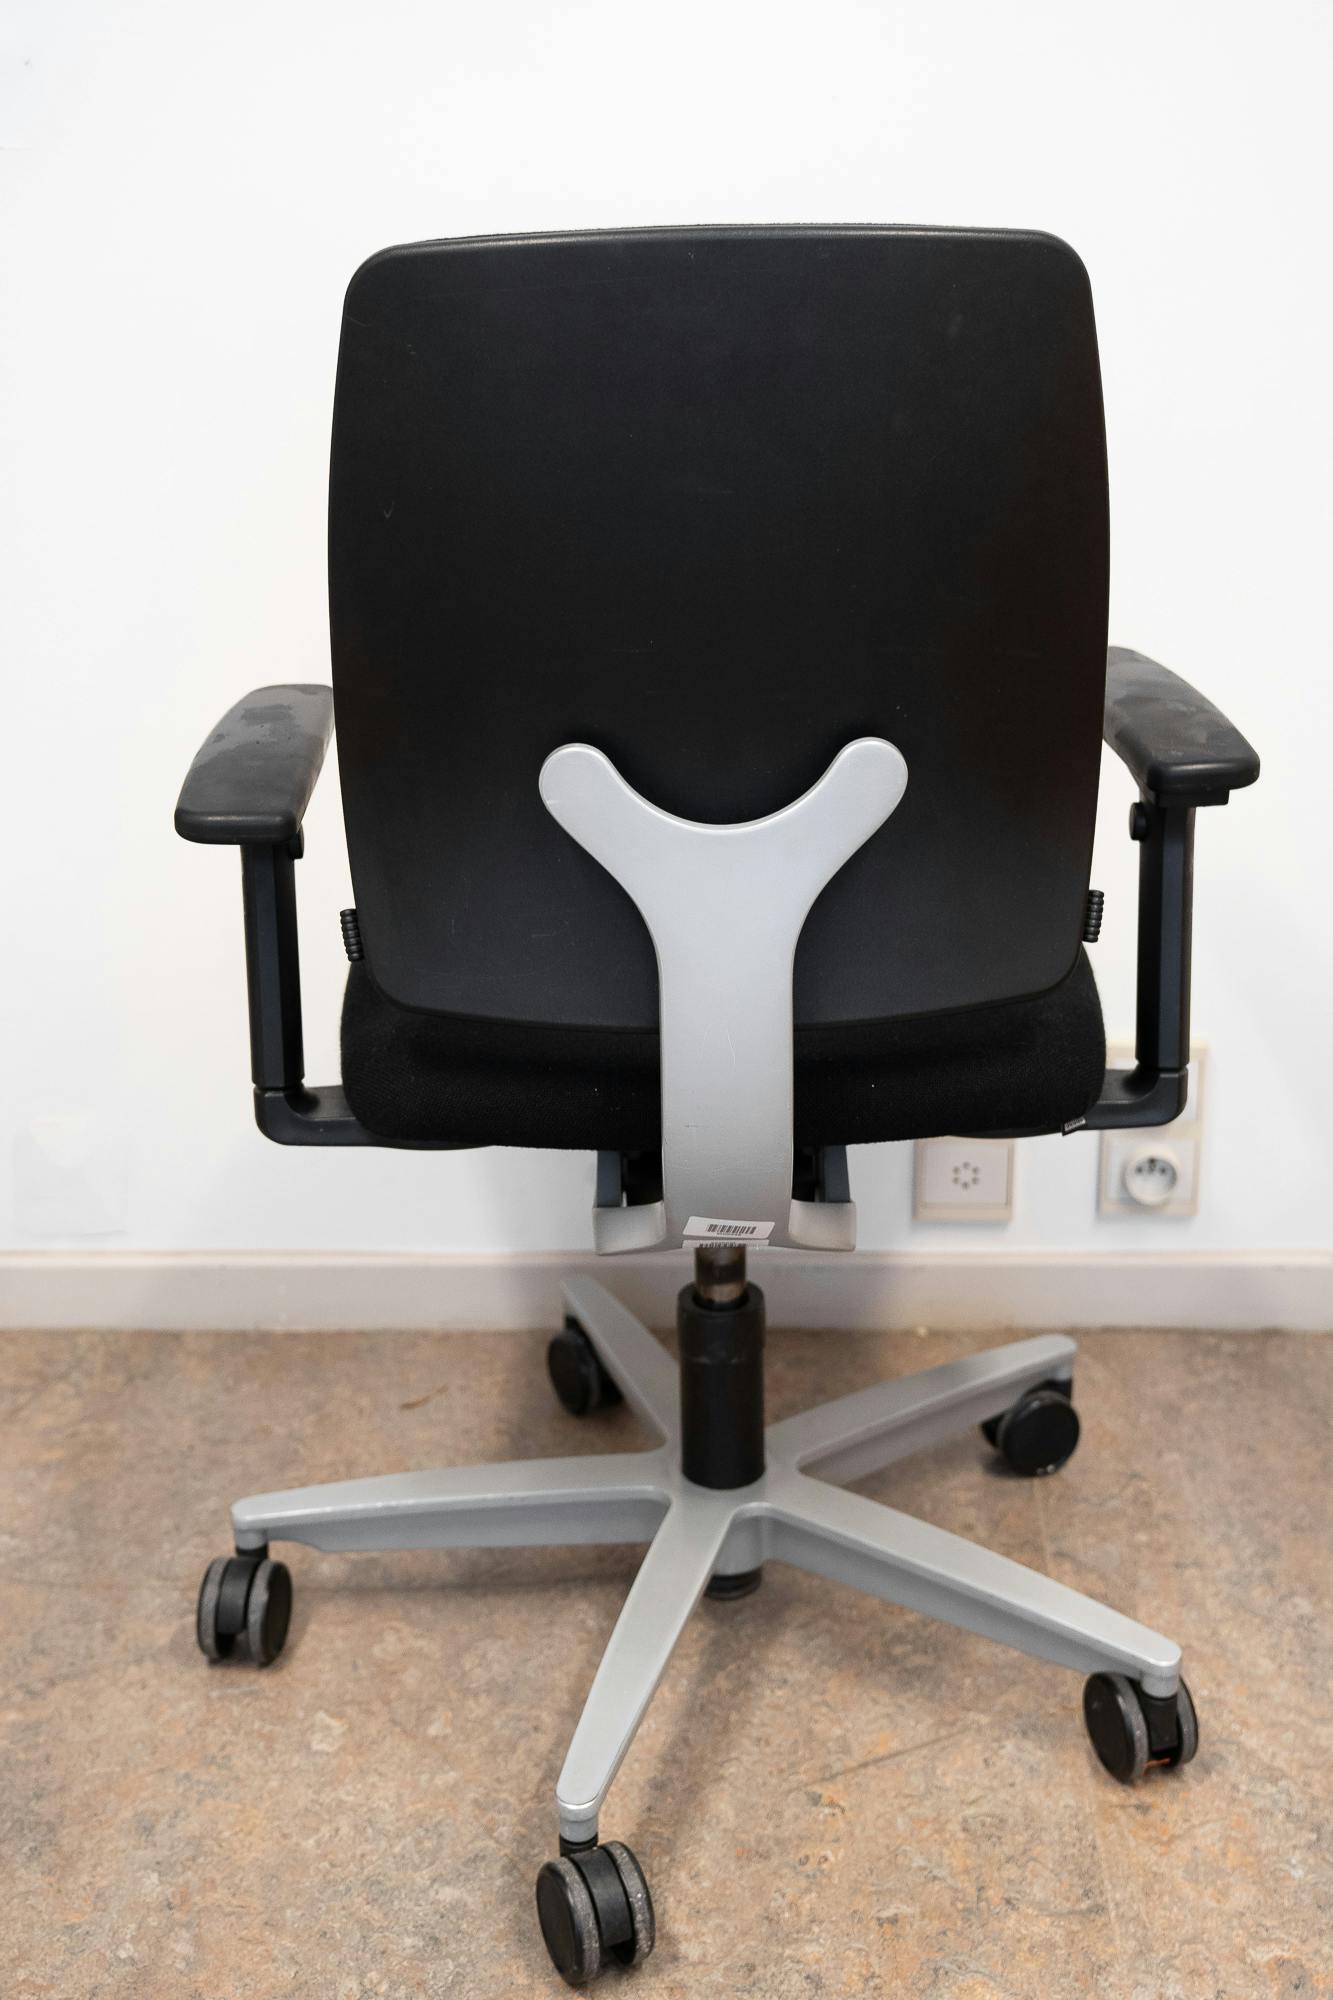 Sedus black office chair with castors - Second hand quality "Office chairs" - Relieve Furniture